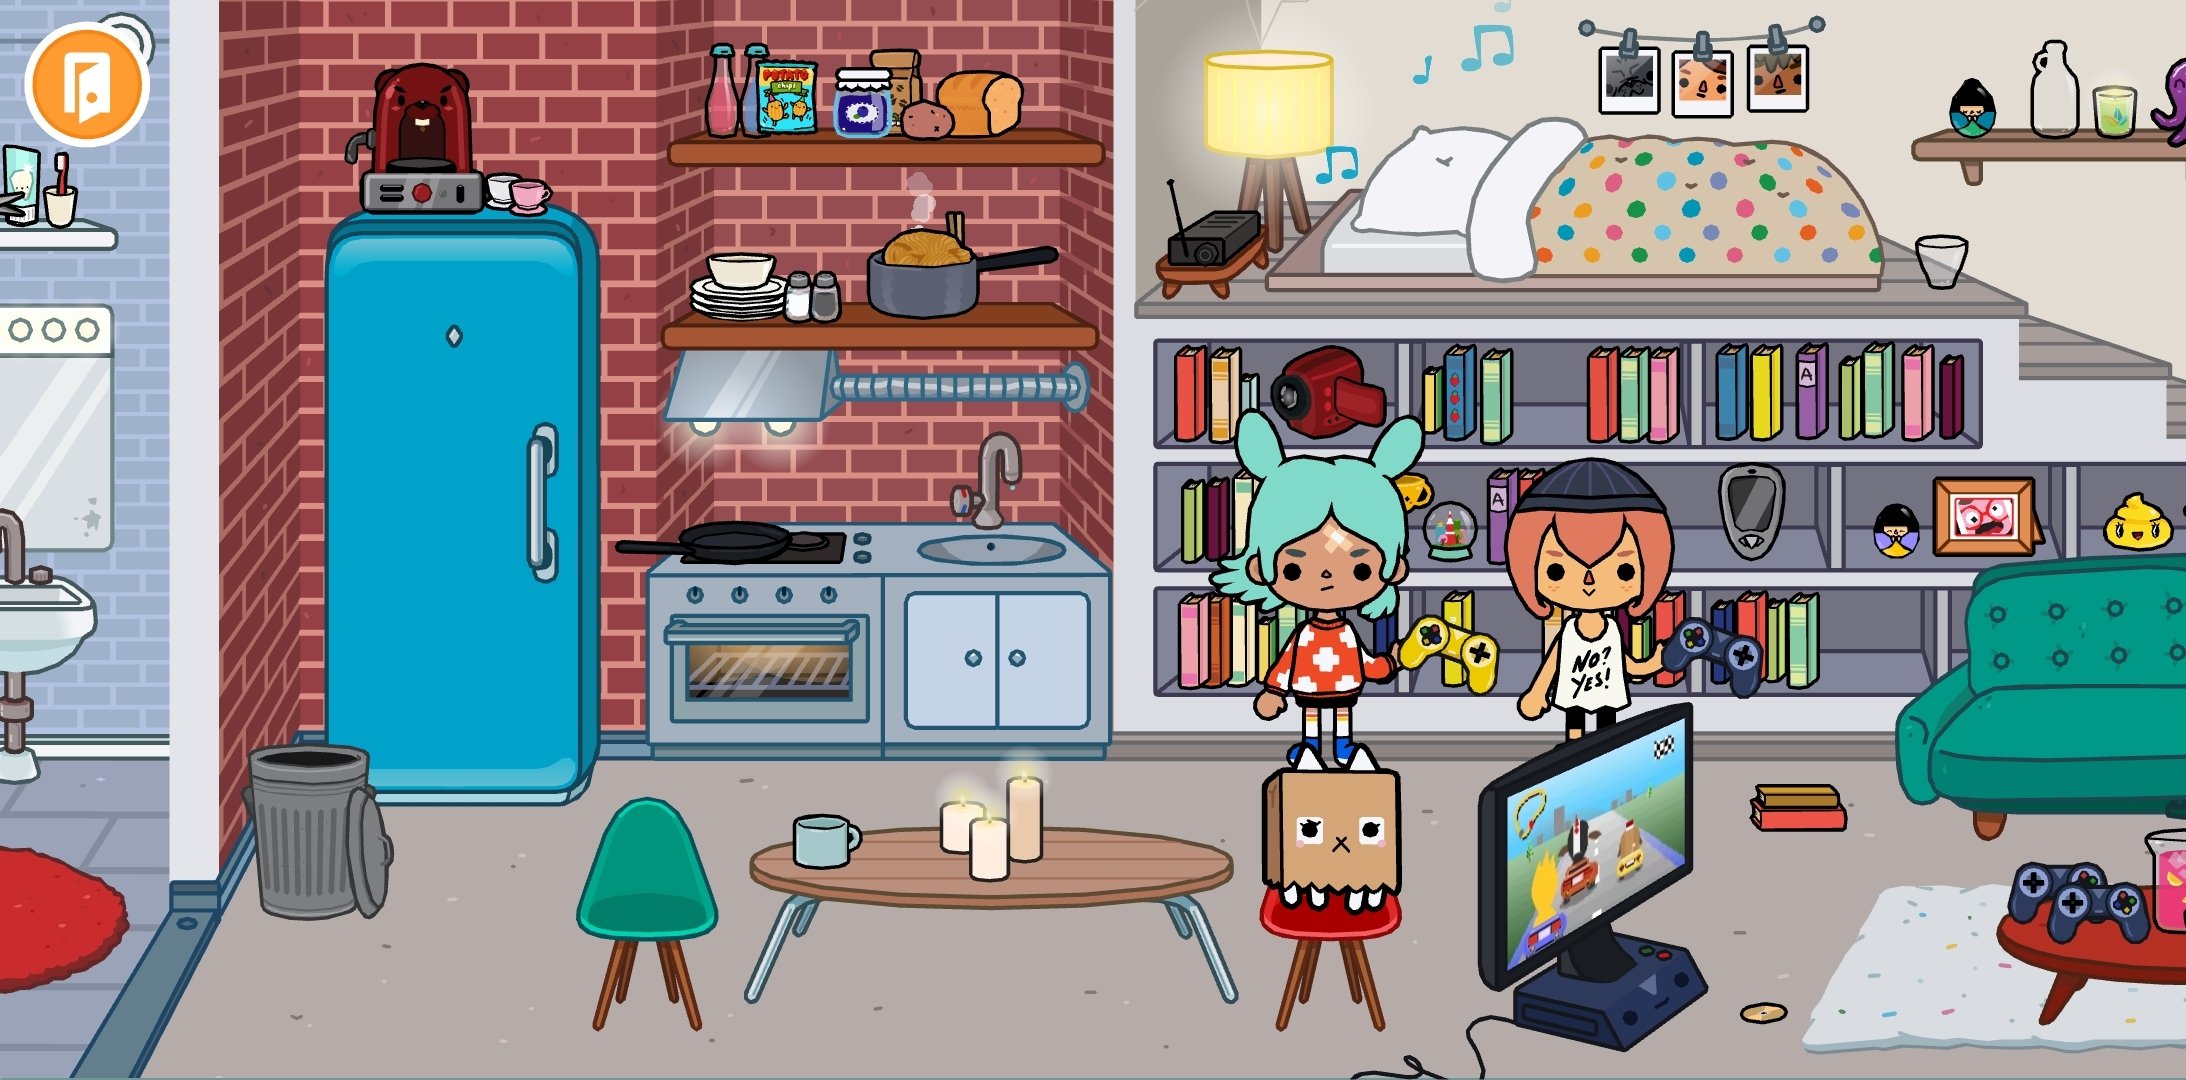 House Mods for Toca Life World na App Store